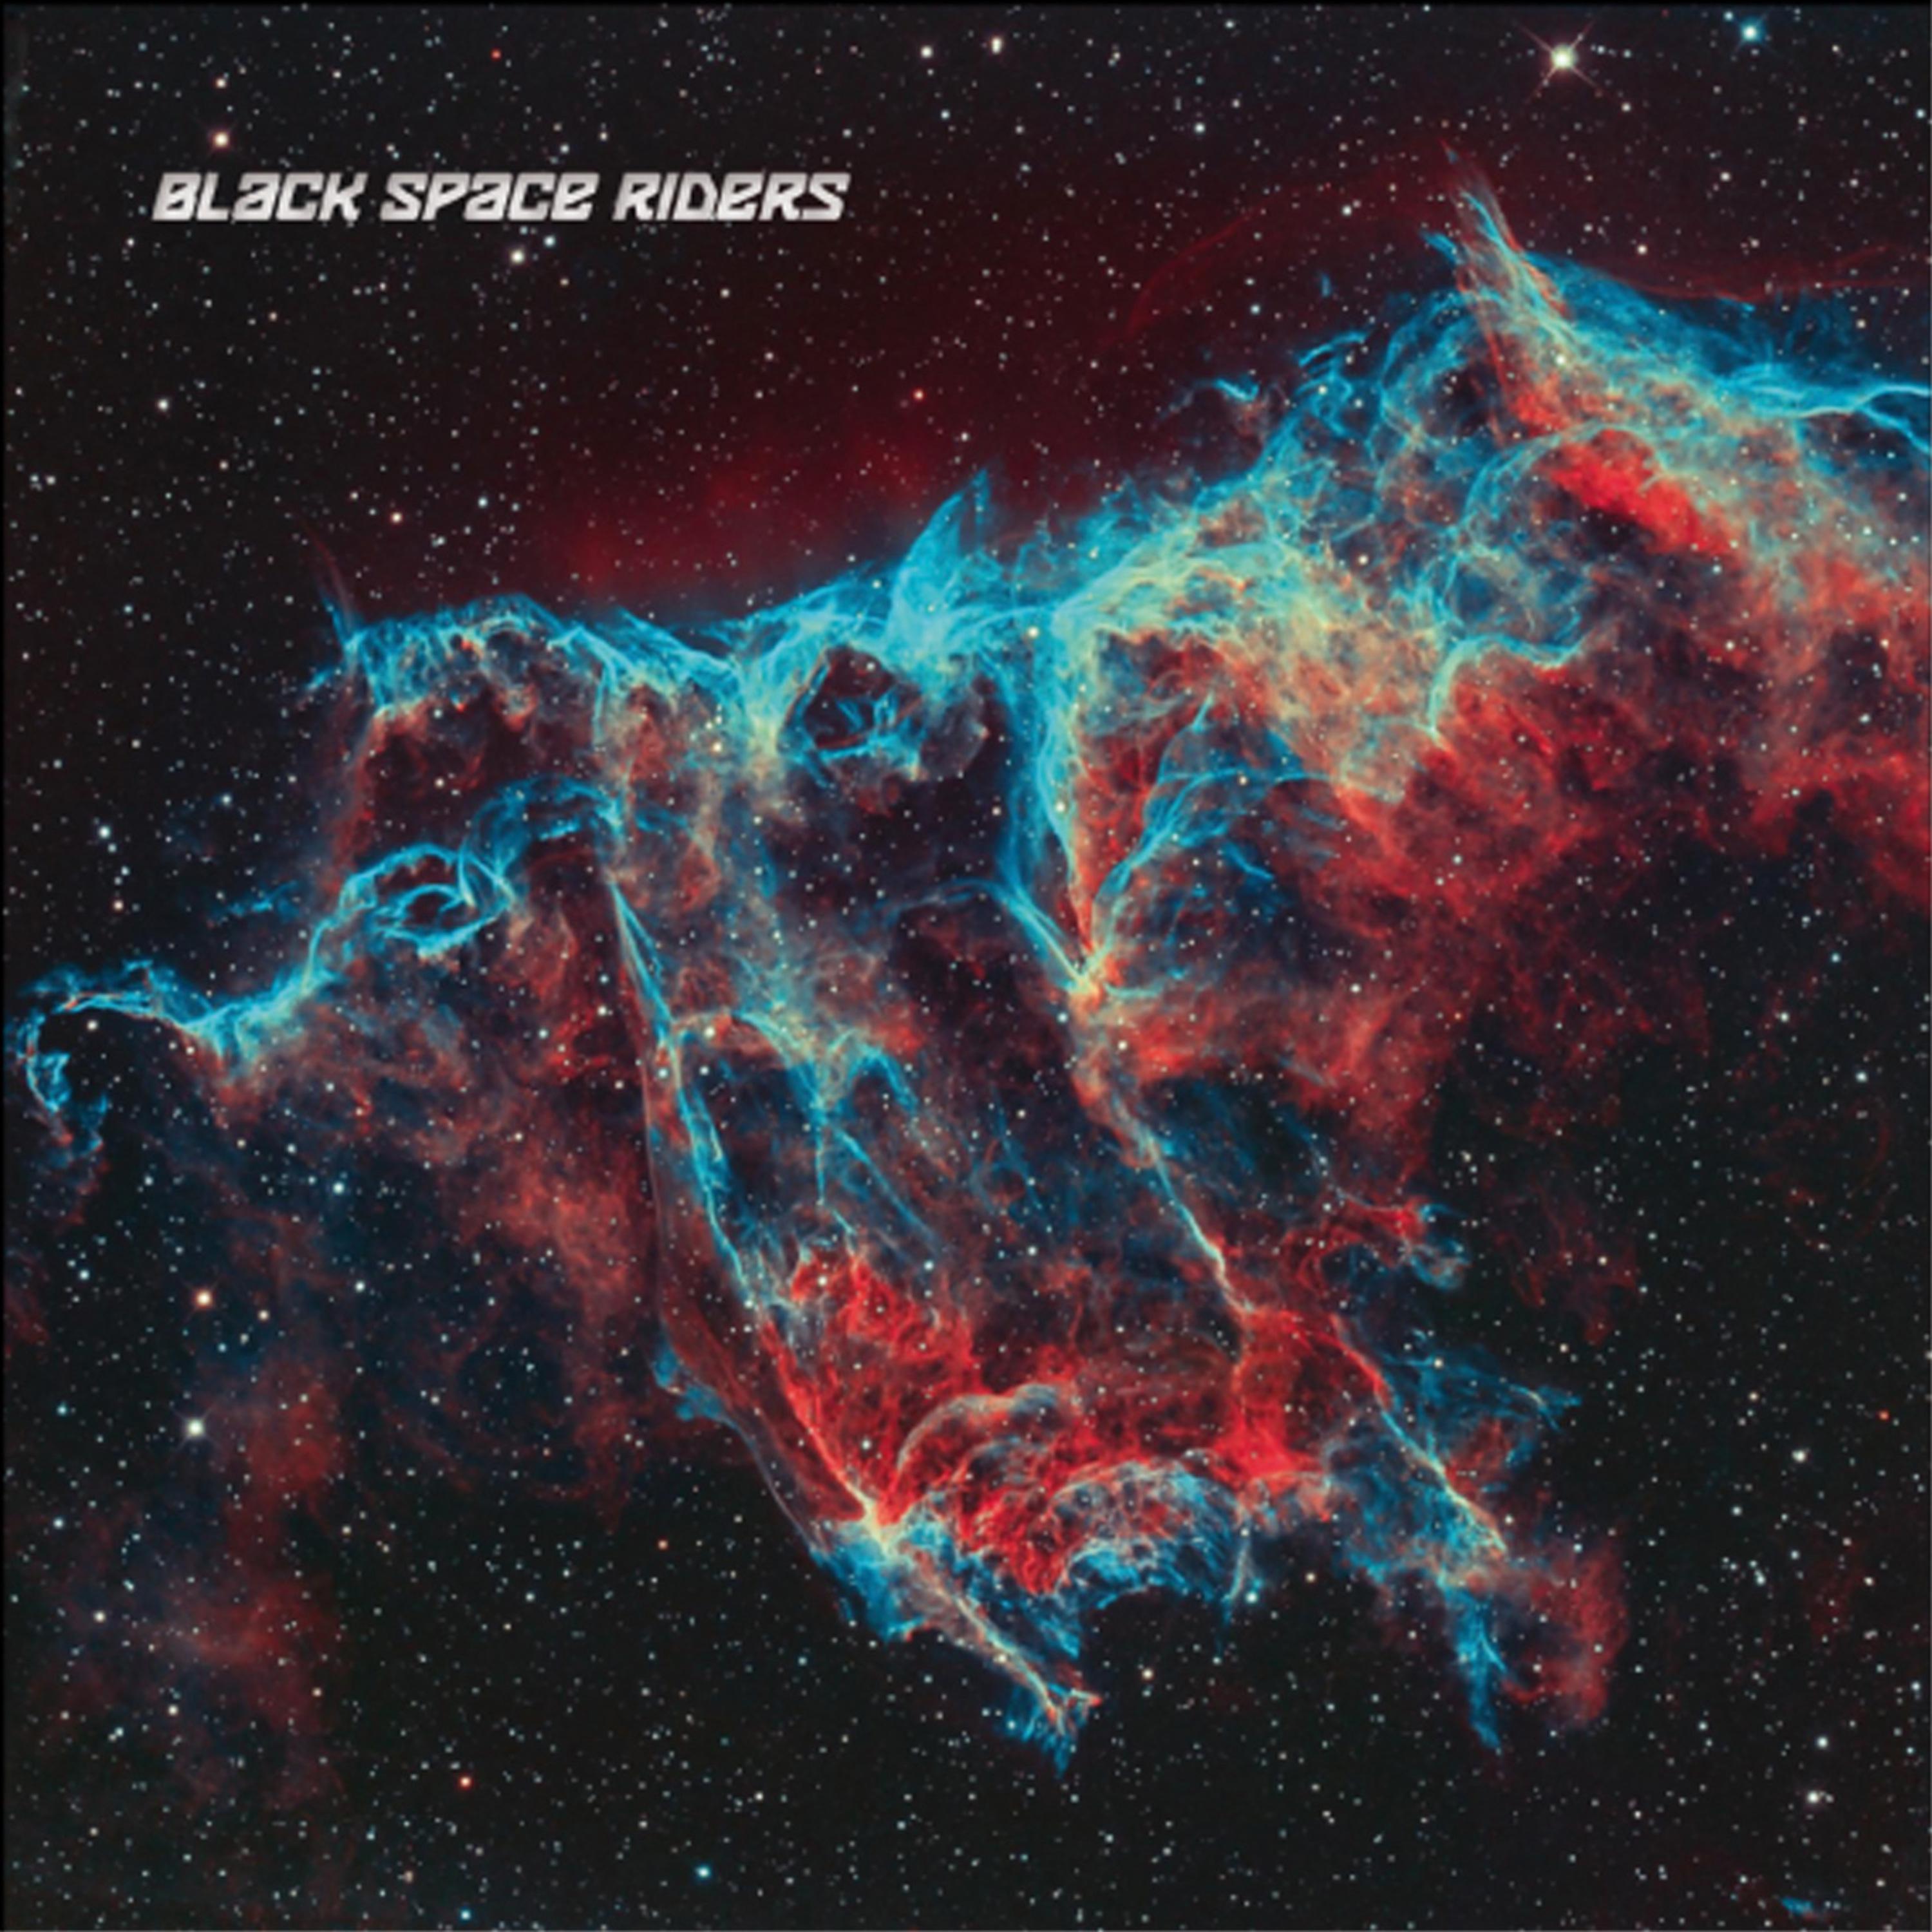 Black Book Of Cosmic Salvation Part 1: A Short Mess(i)age From The Black Space Rider